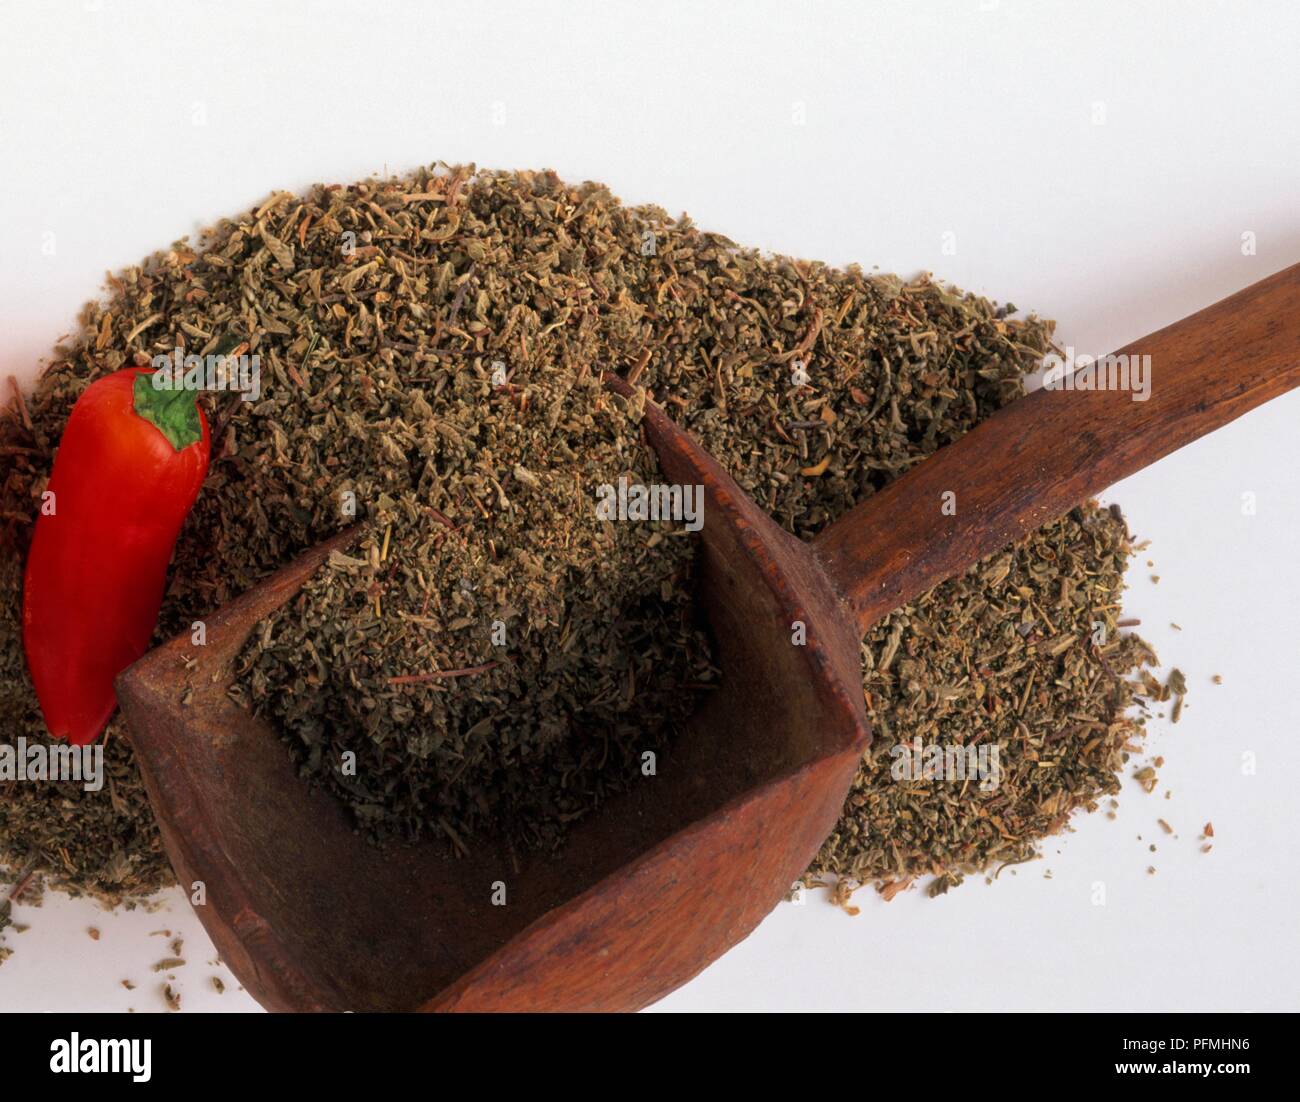 Dried leaves from Turnera diffusa (Damiana), wooden scoop, and cayenne pepper Stock Photo